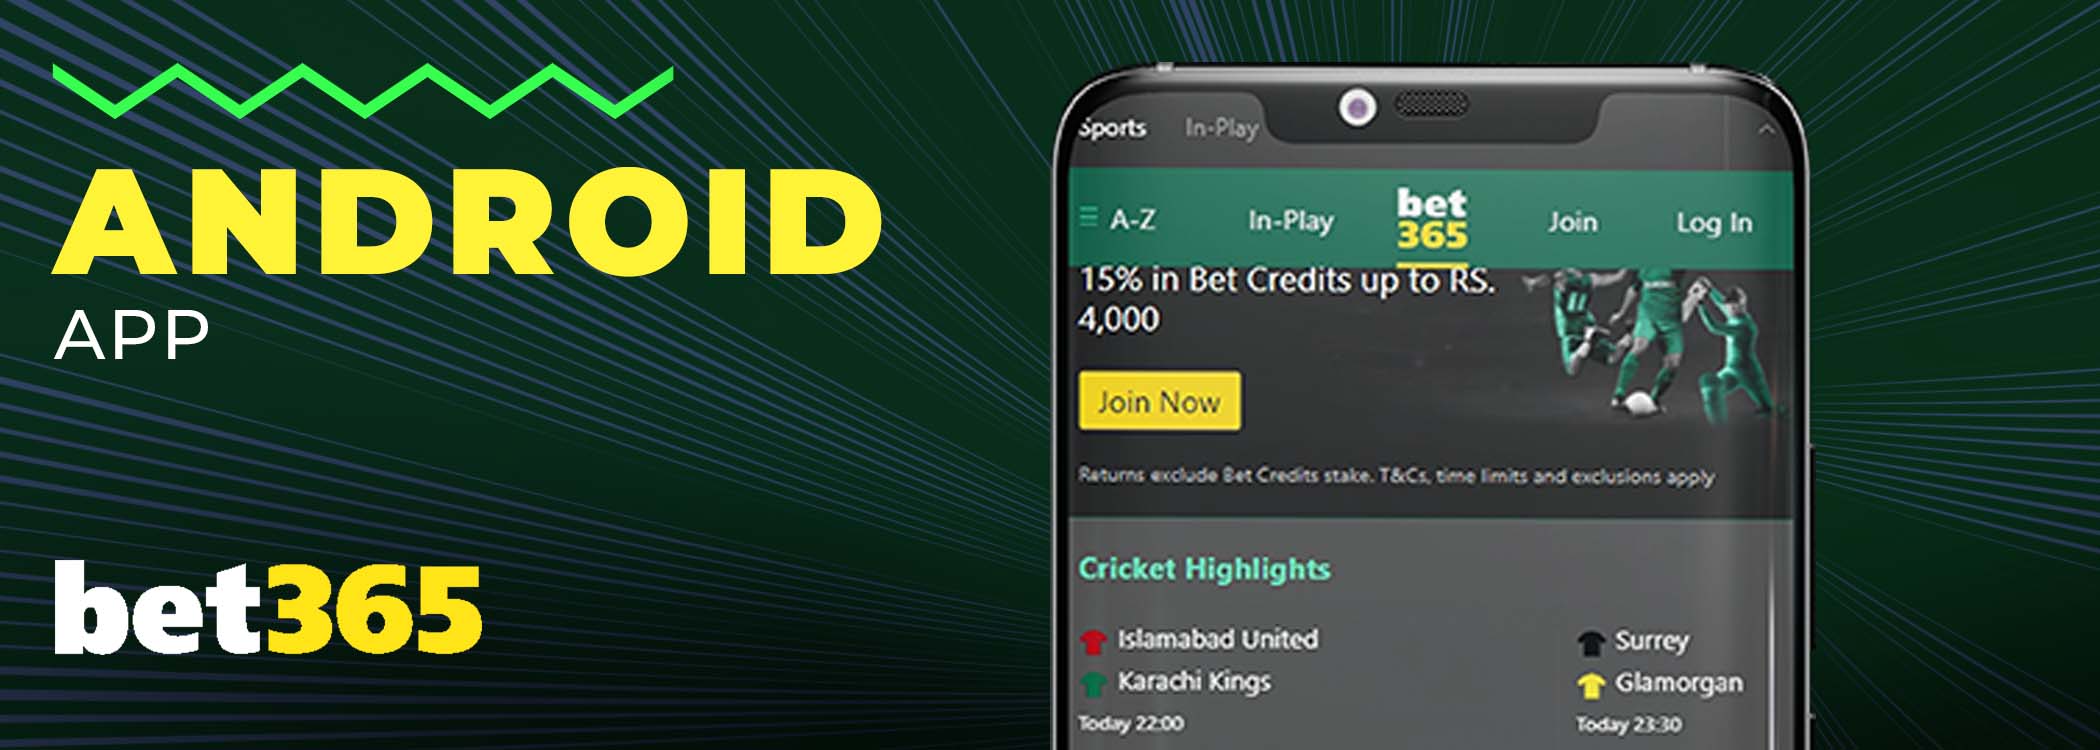 Bet365 android app.